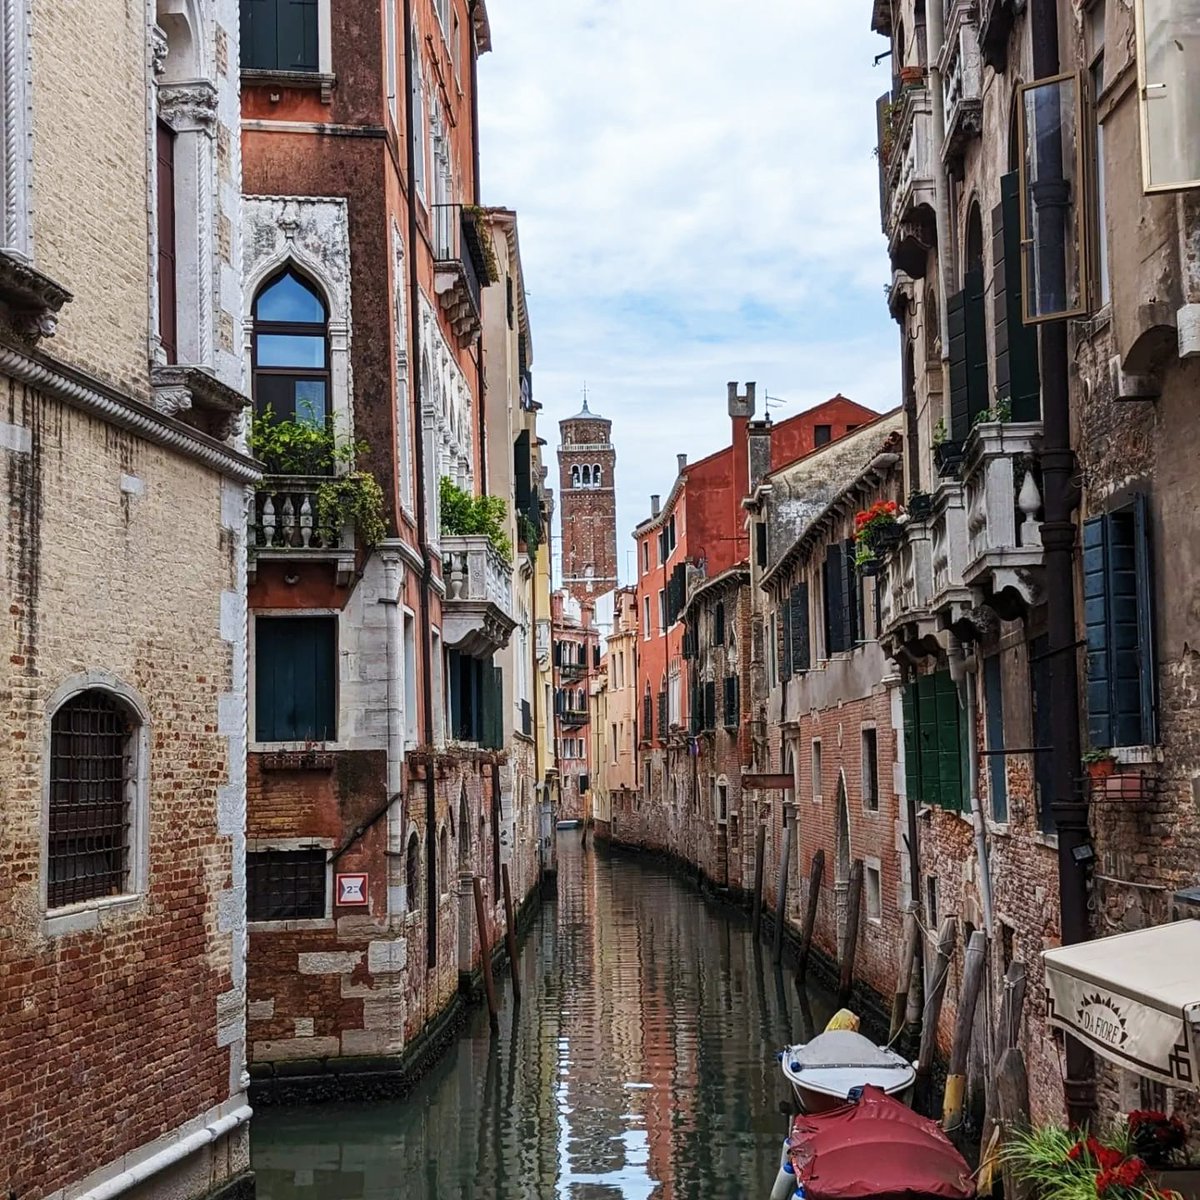 Here's a photo of one of the narrow canals in Venice, Italy ❤️ #Travel #Venice #Italy #travelphotography